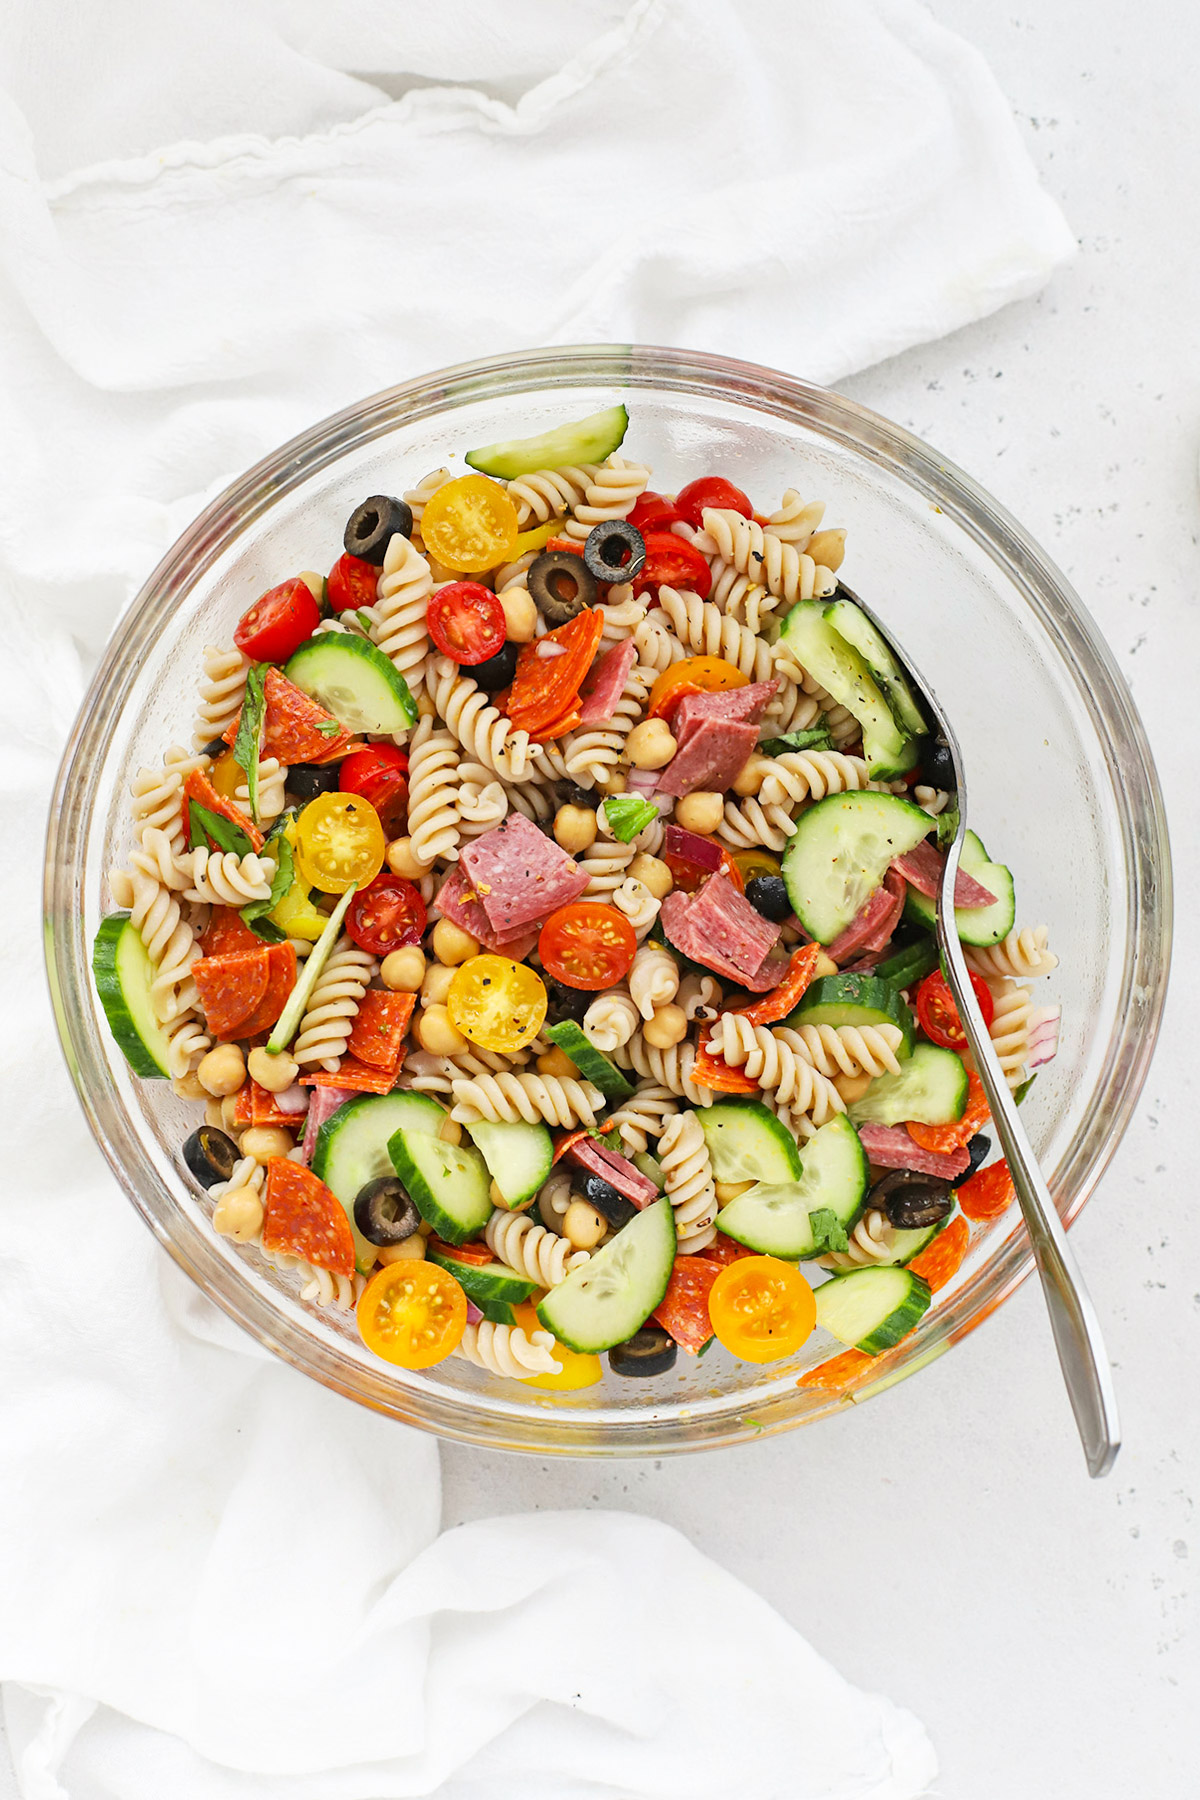 Overhead view of a large bowl of gluten-free pasta salad with Italian dressing